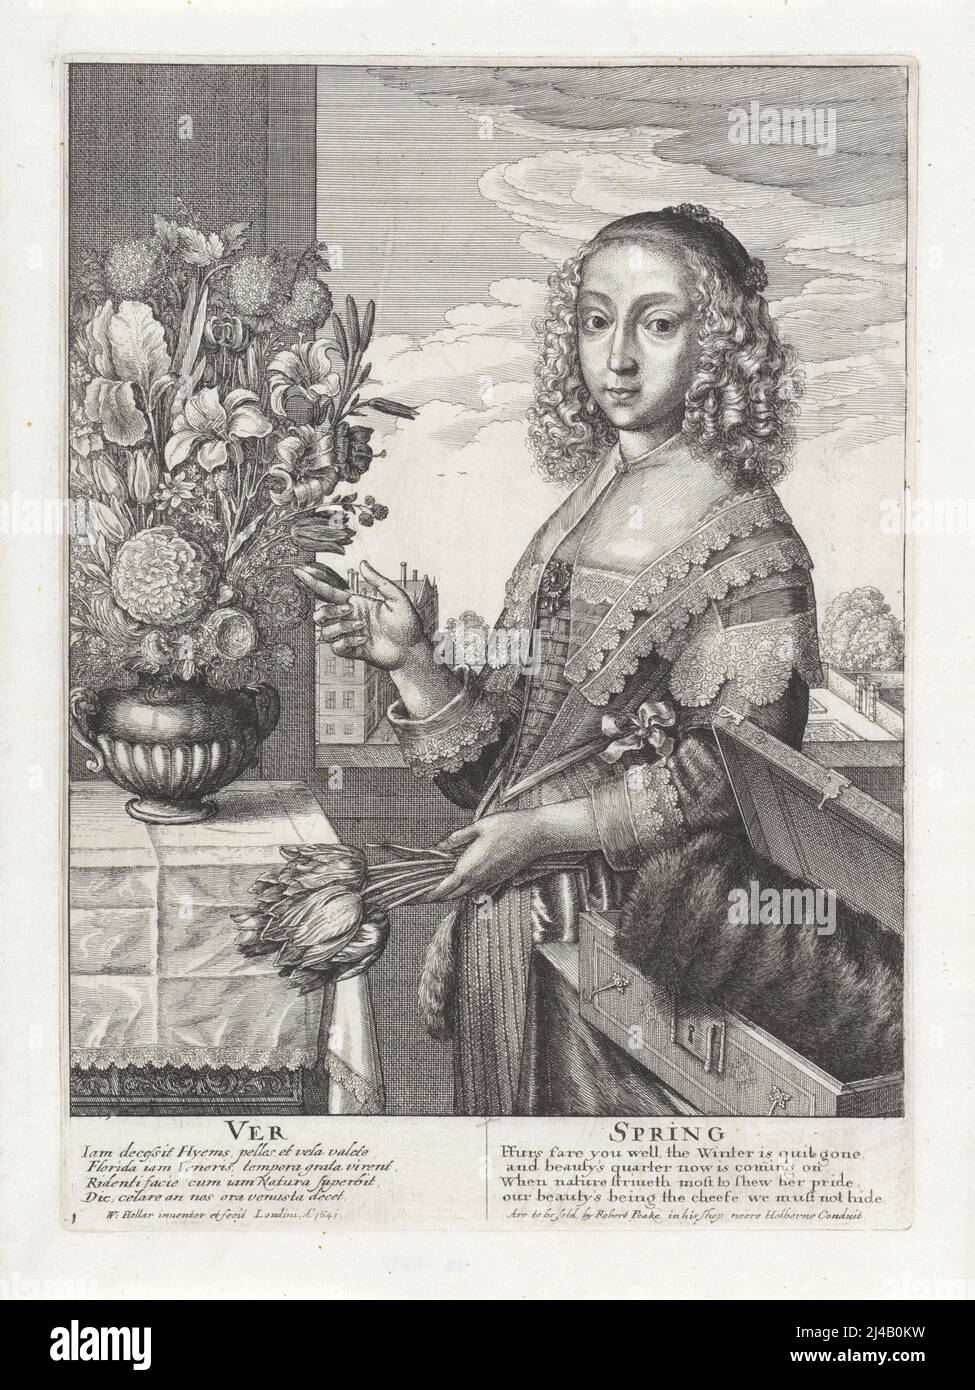 The Four Seasons: Spring Lady with flowers Dutch engraving from the 17th century Stock Photo